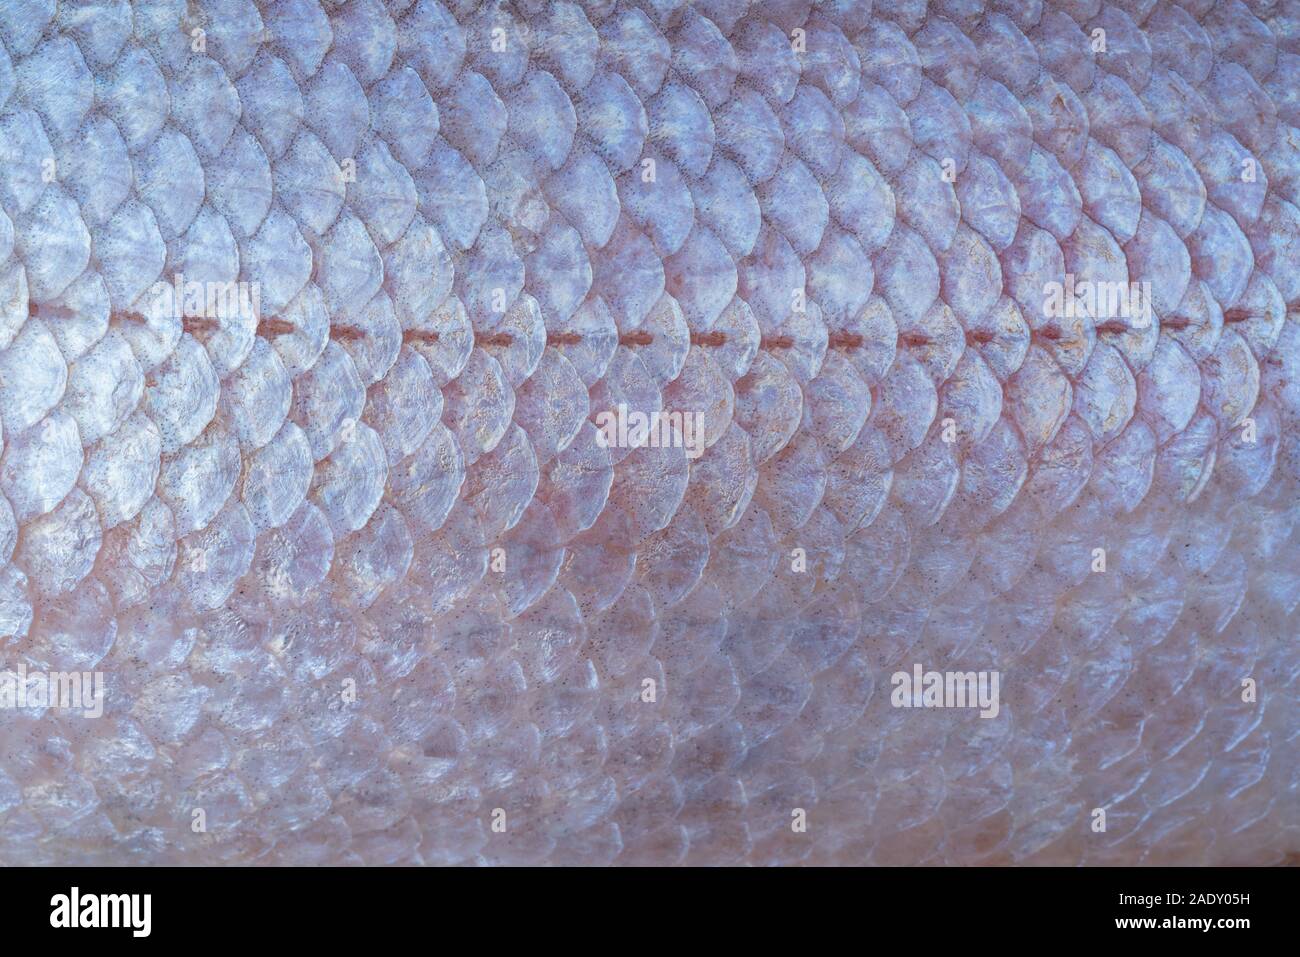 Large fish scales. Natural texture. Symmetrical pattern of scales